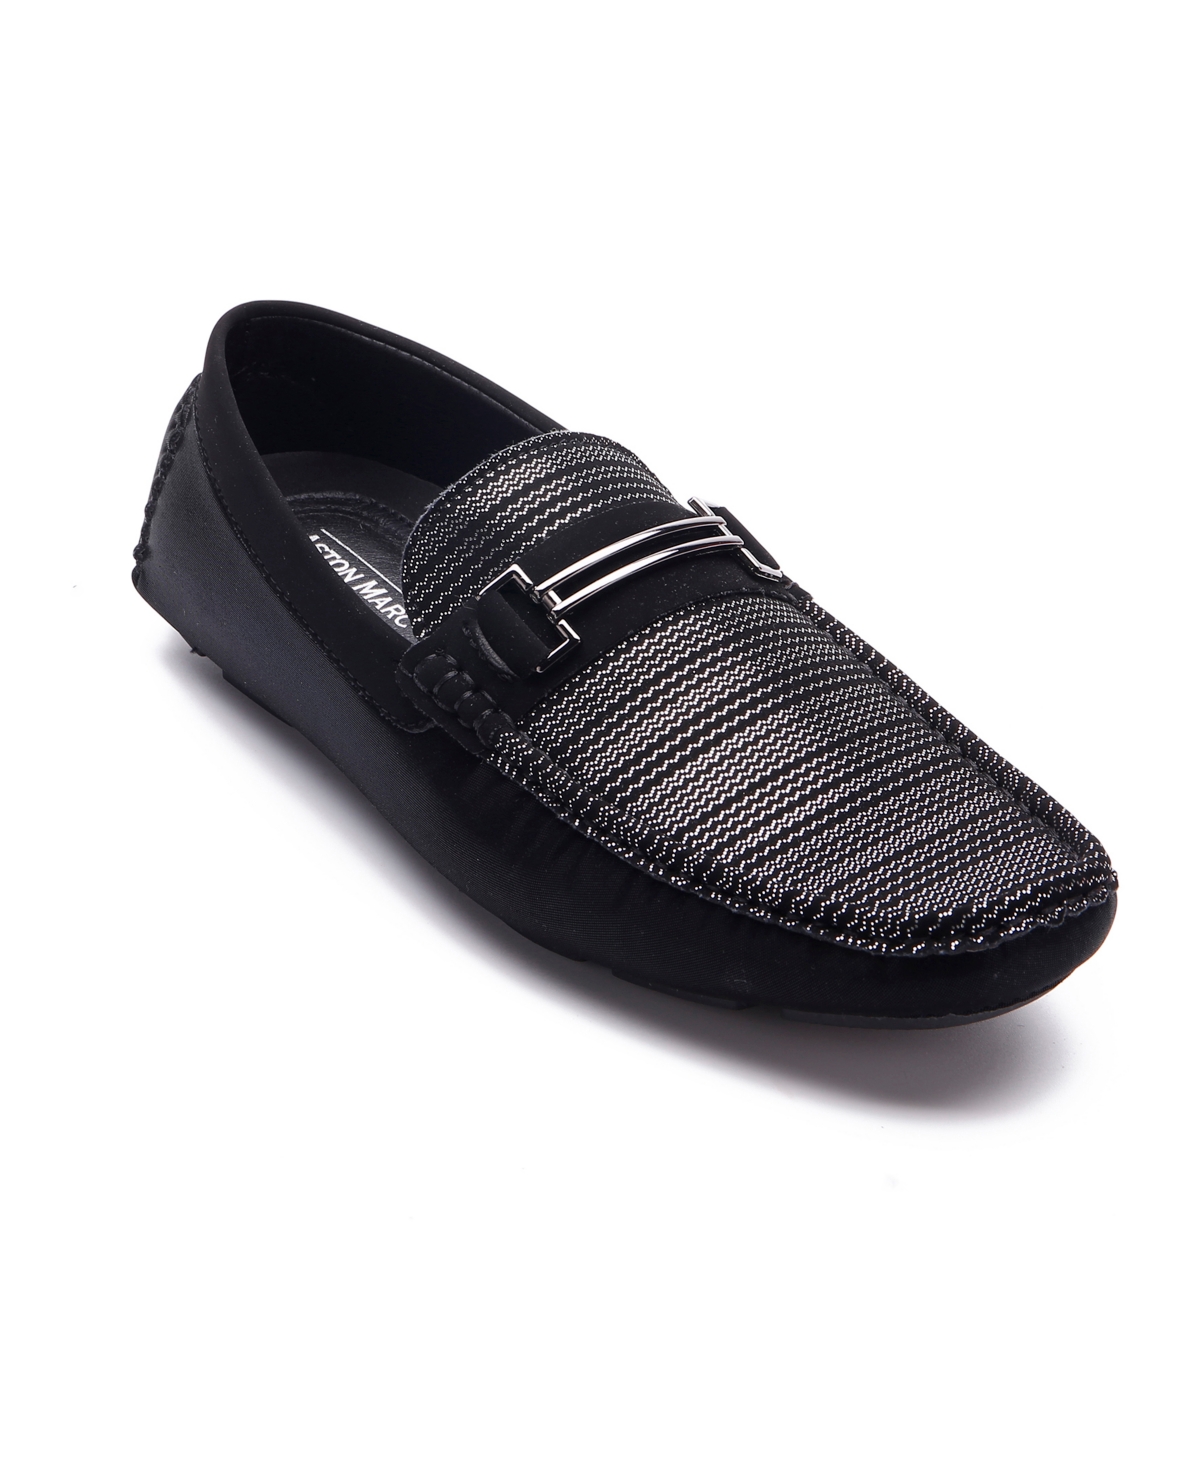 Men's Fashion Driving Shoes - Pewter